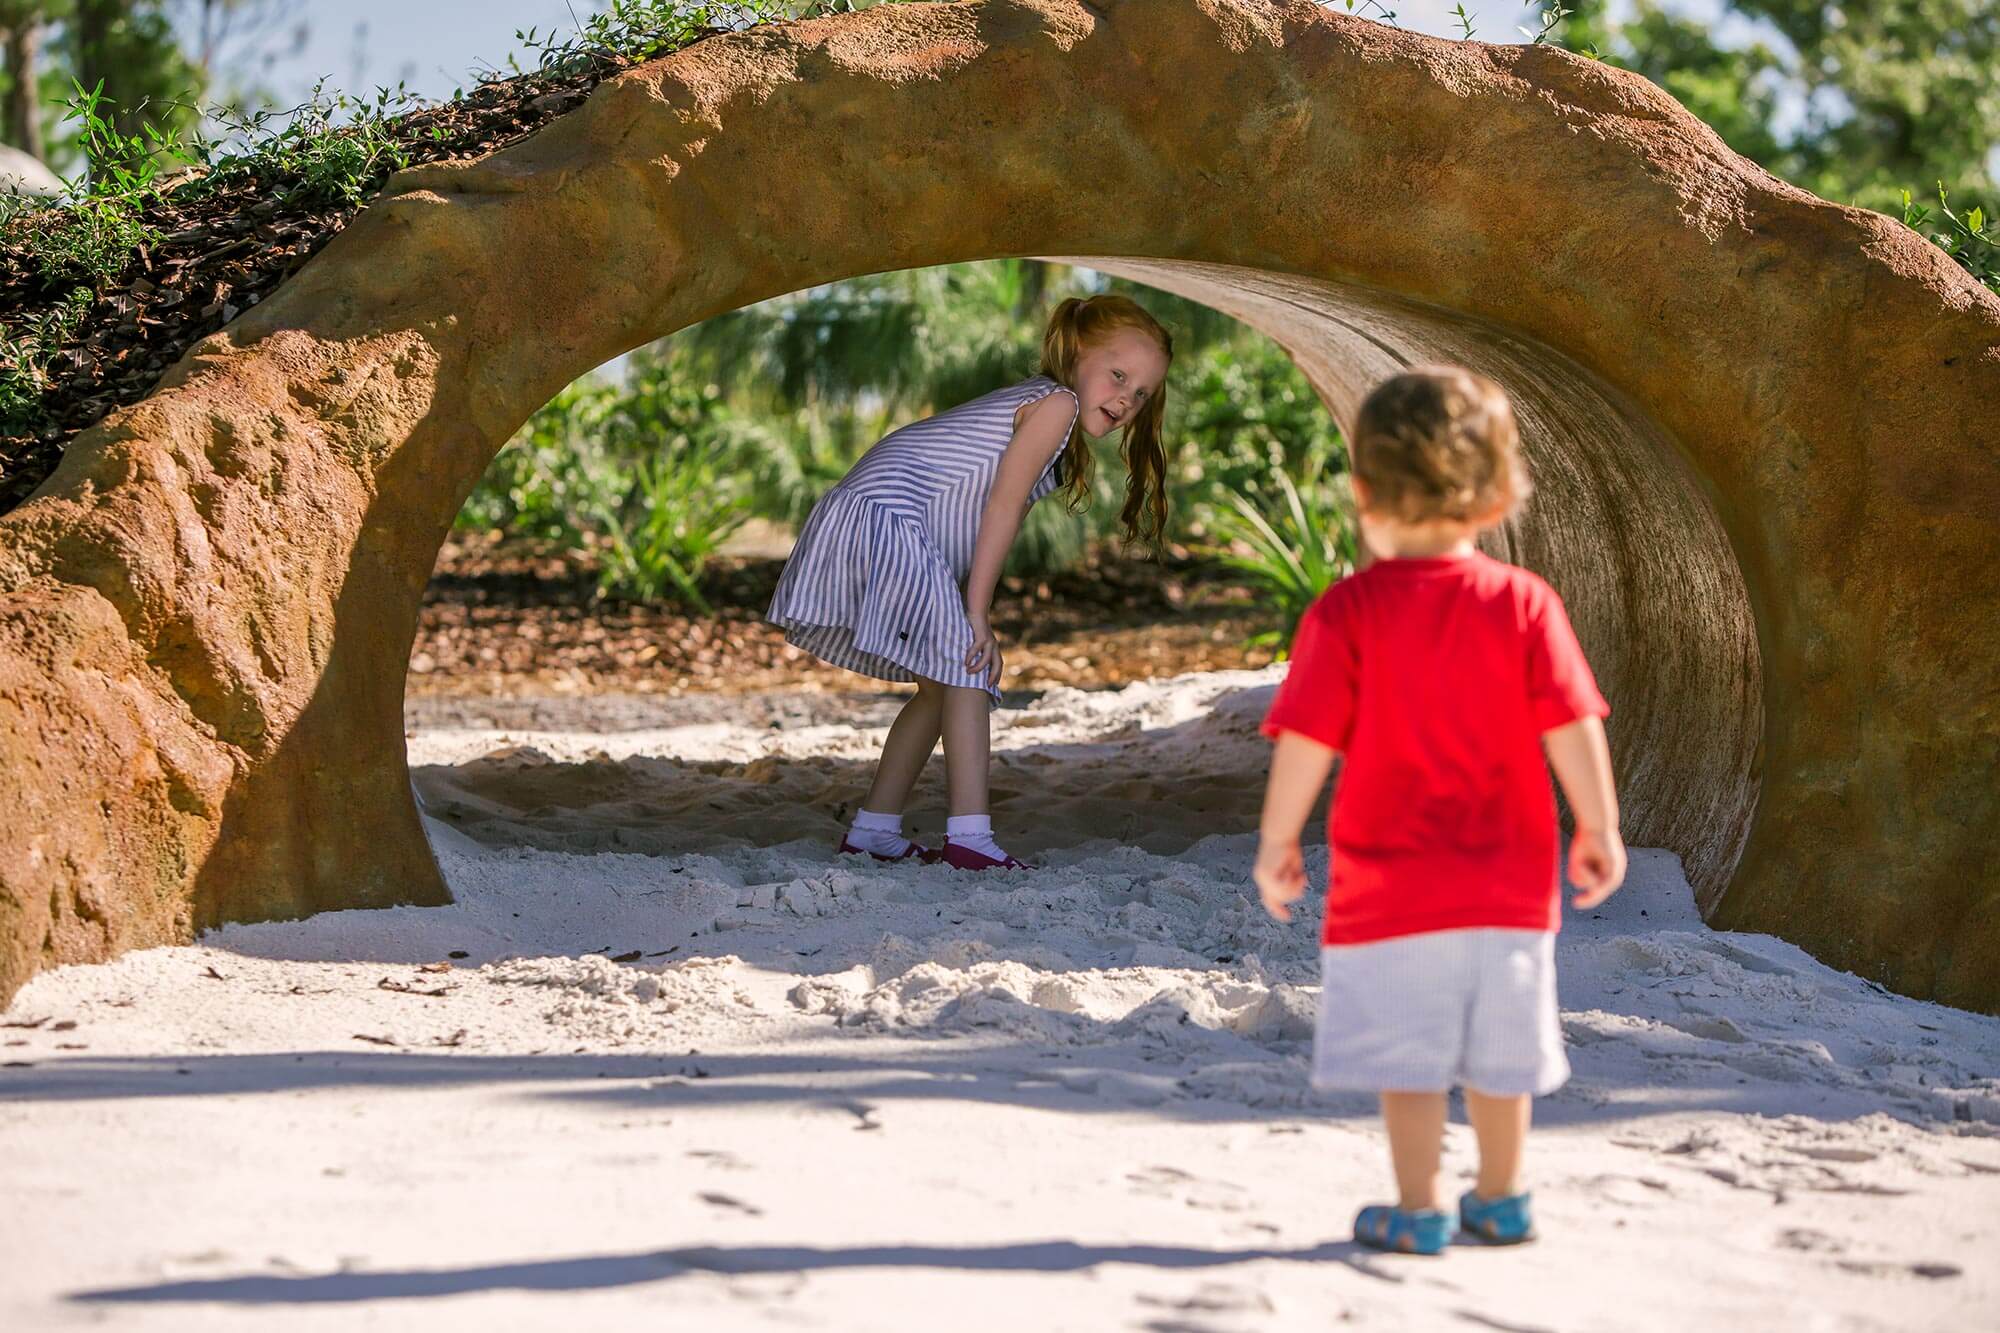 2 kids playing in Gopher Tortoise Burrow at Hammock Hollow in Bok Tower Gardens.